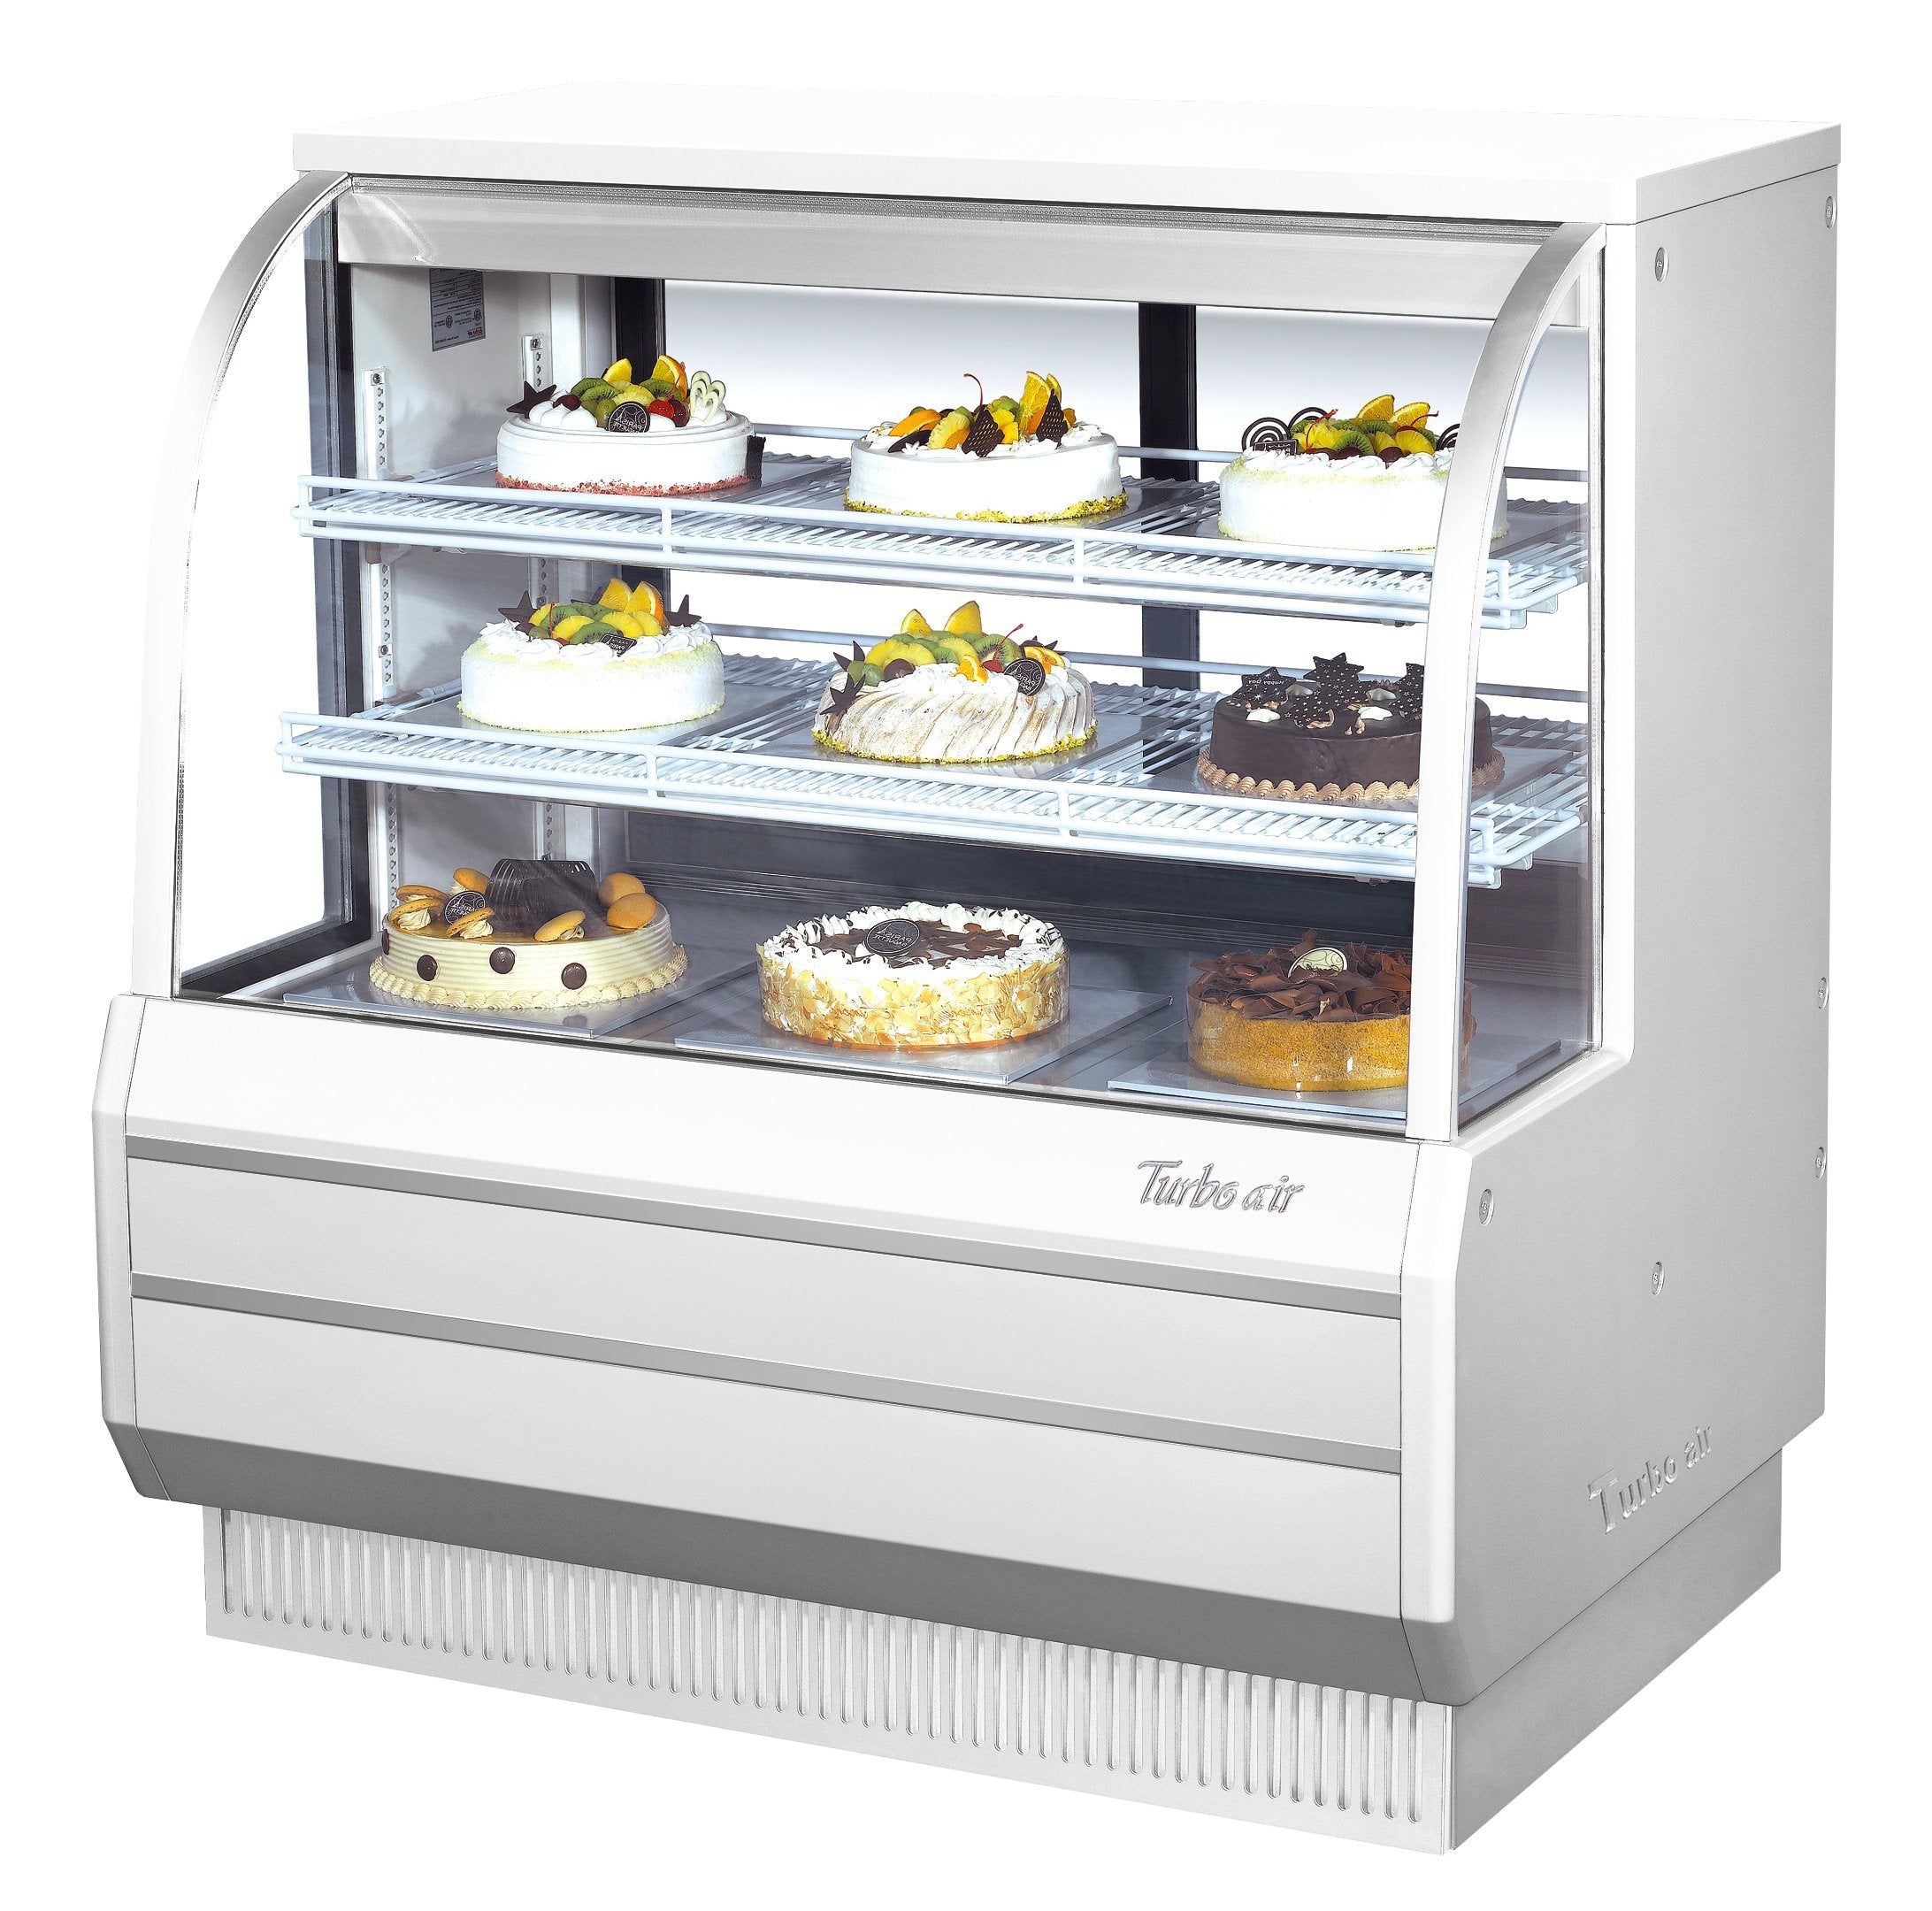 Turbo Air TCGB-48-W-N 4' Bakery Case-Refrigerated - White